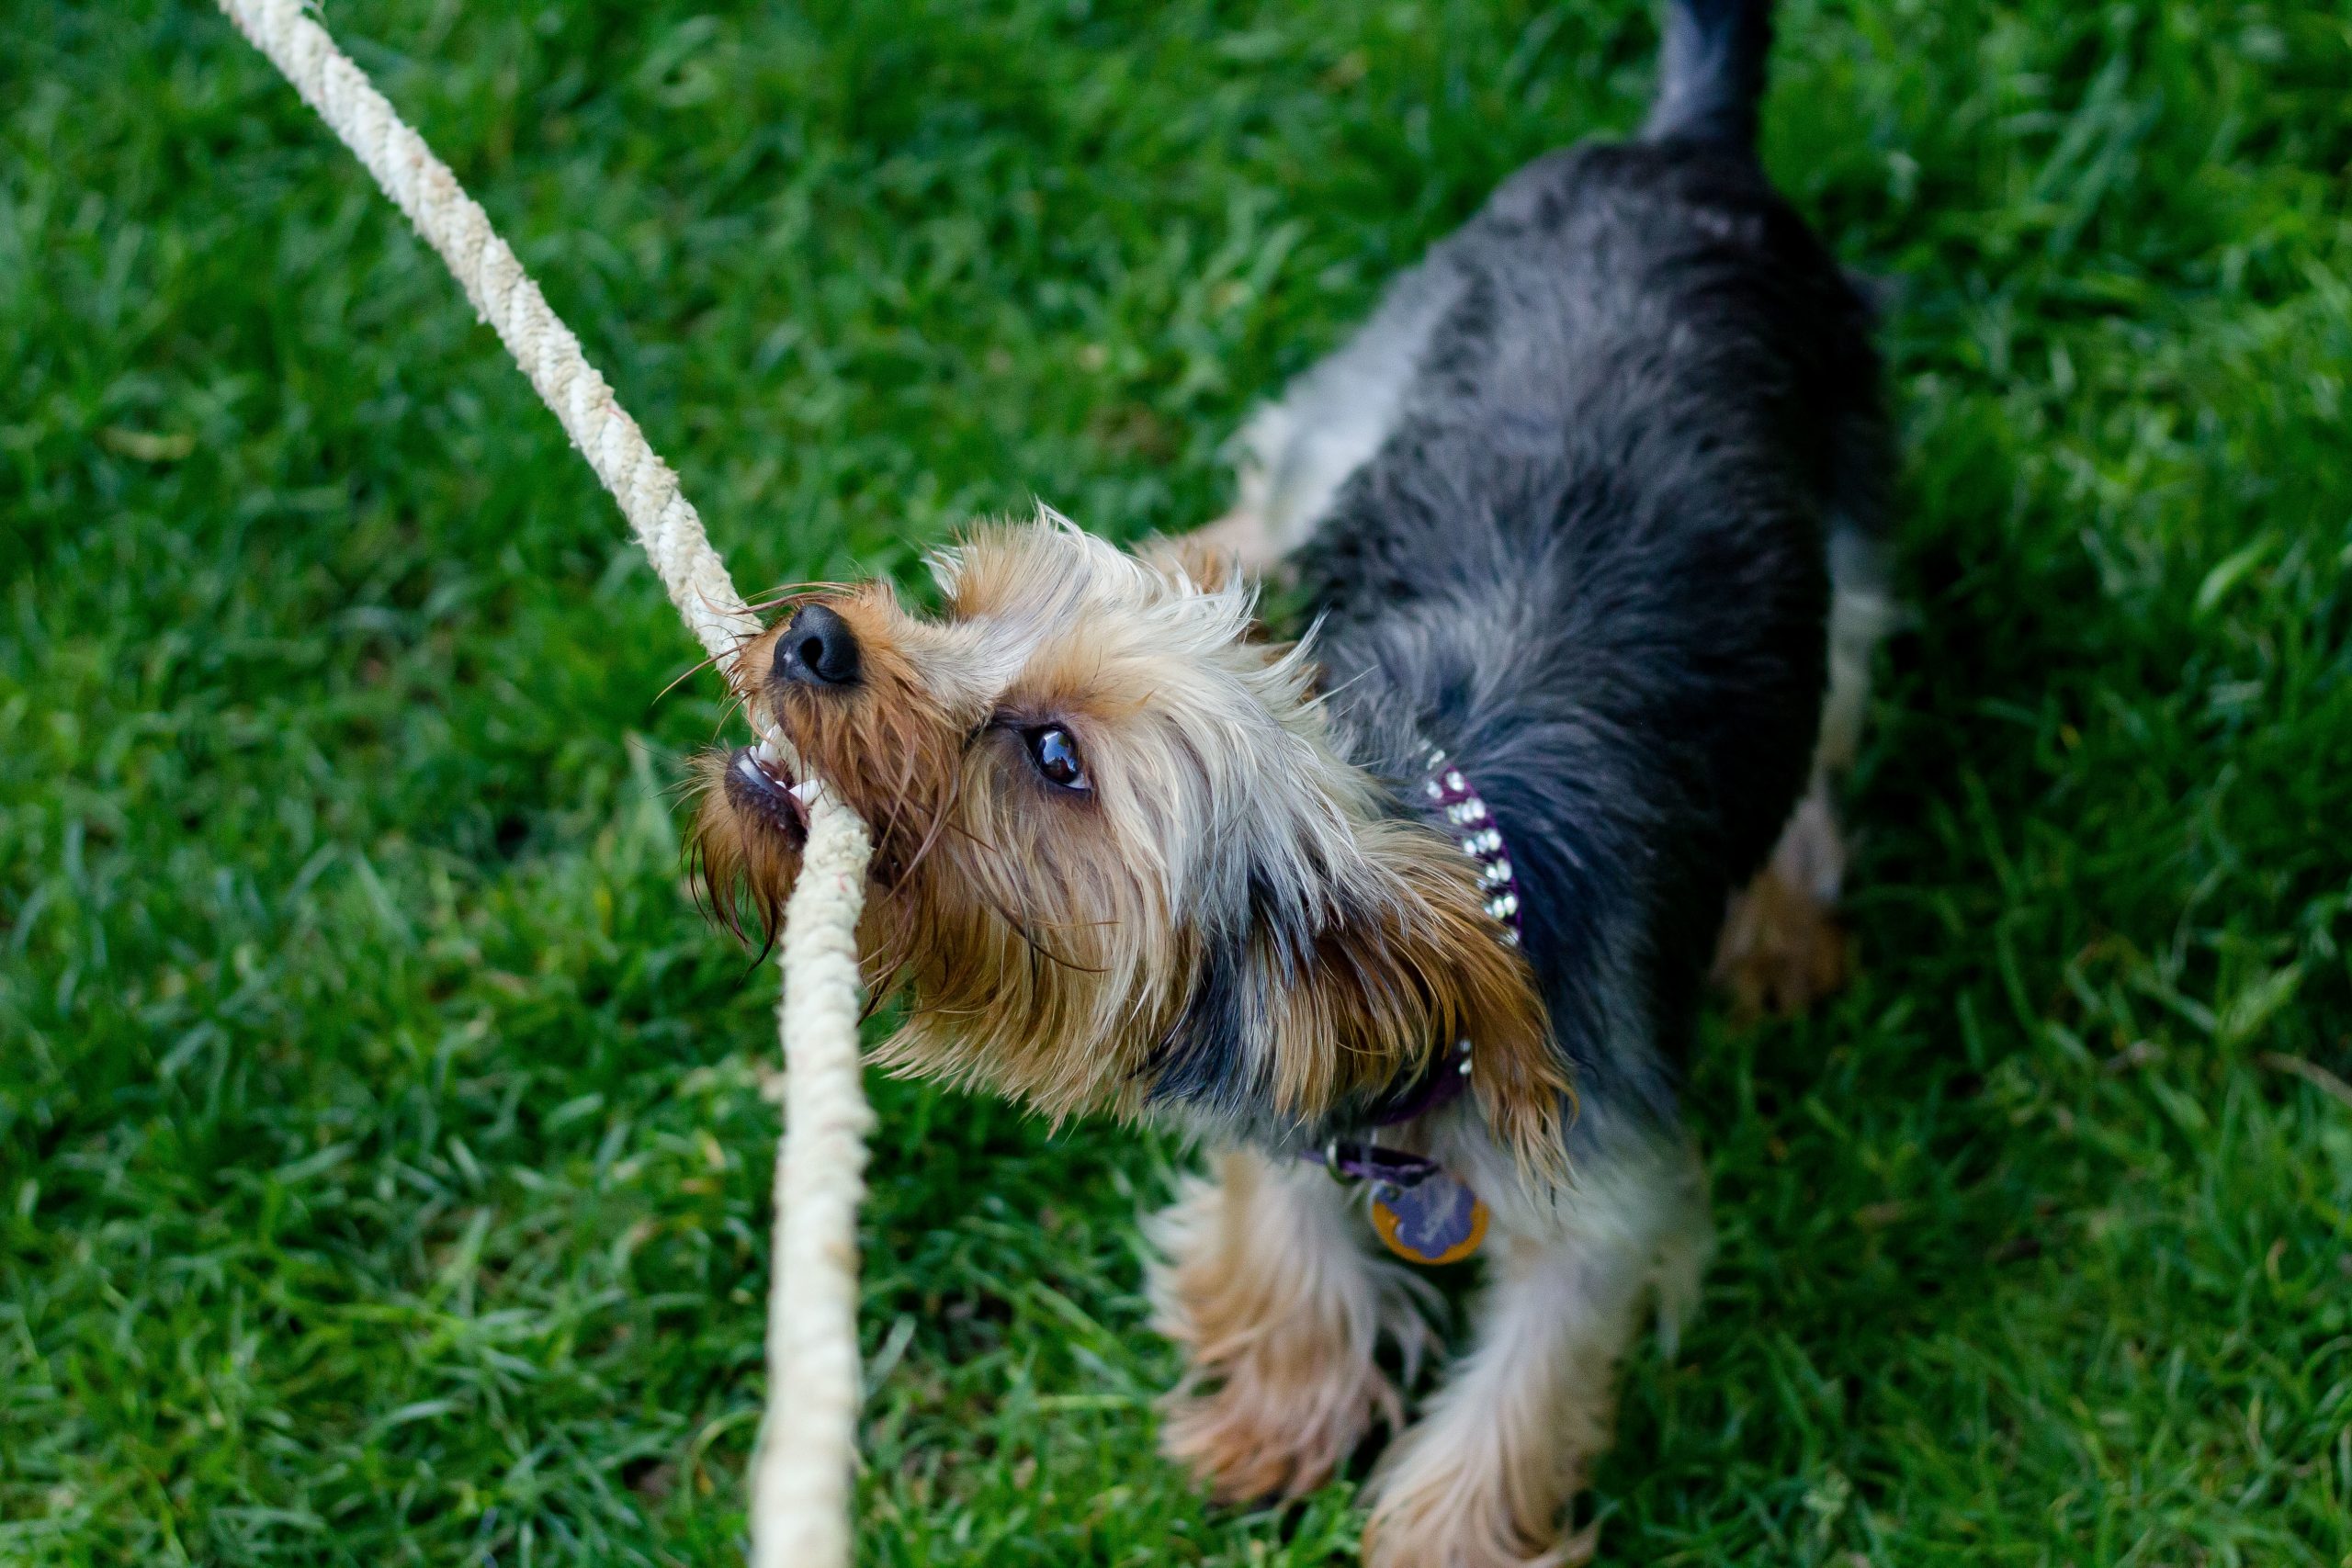 Closeup shot of a cute dog chewing on a rope in a grassy field